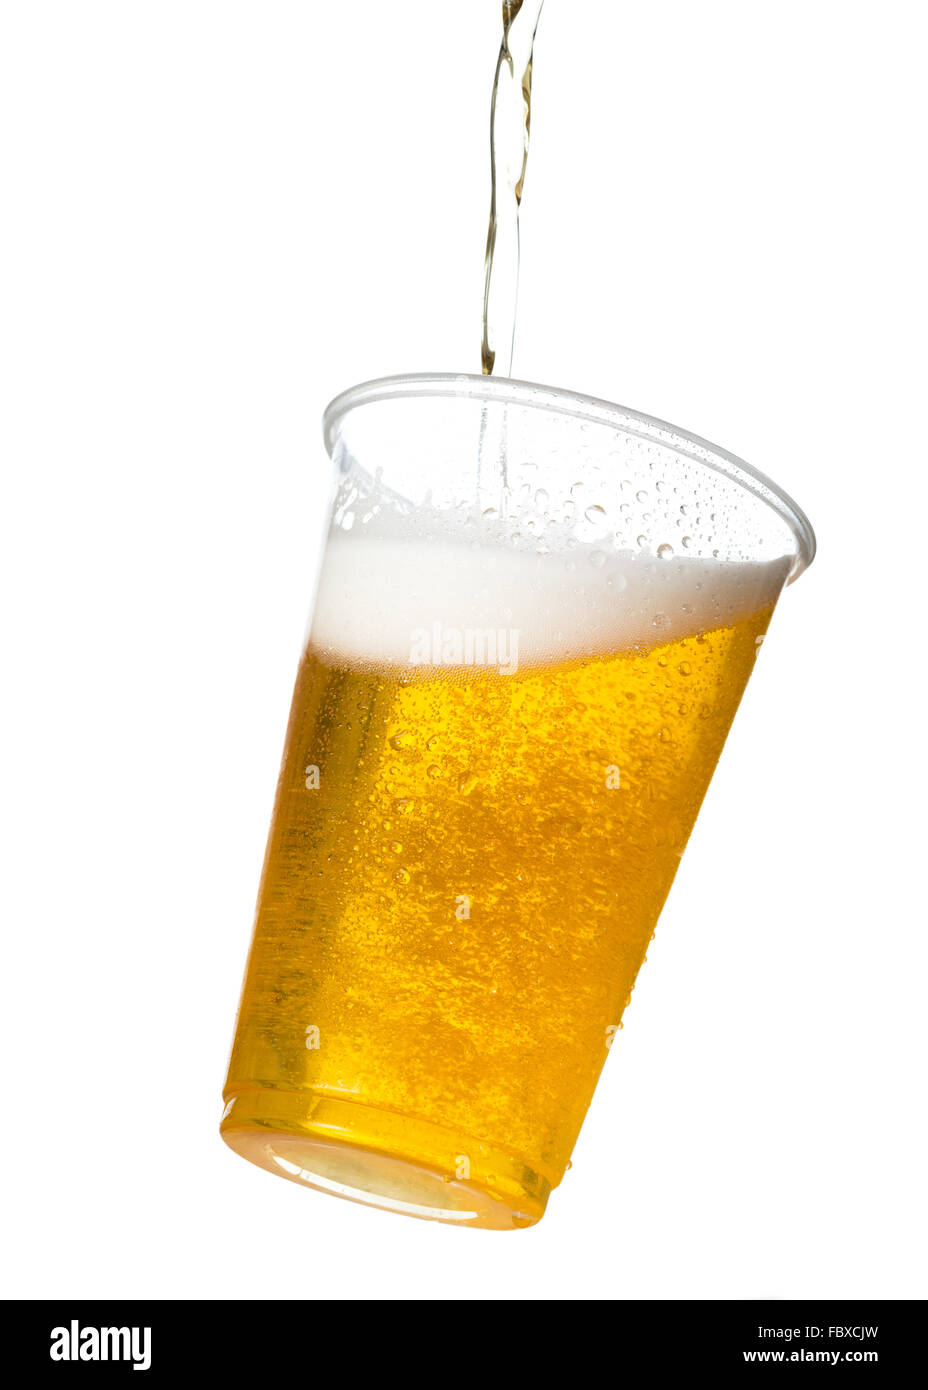 Golden lager or beer in disposable plastic cup Stock Photo - Alamy